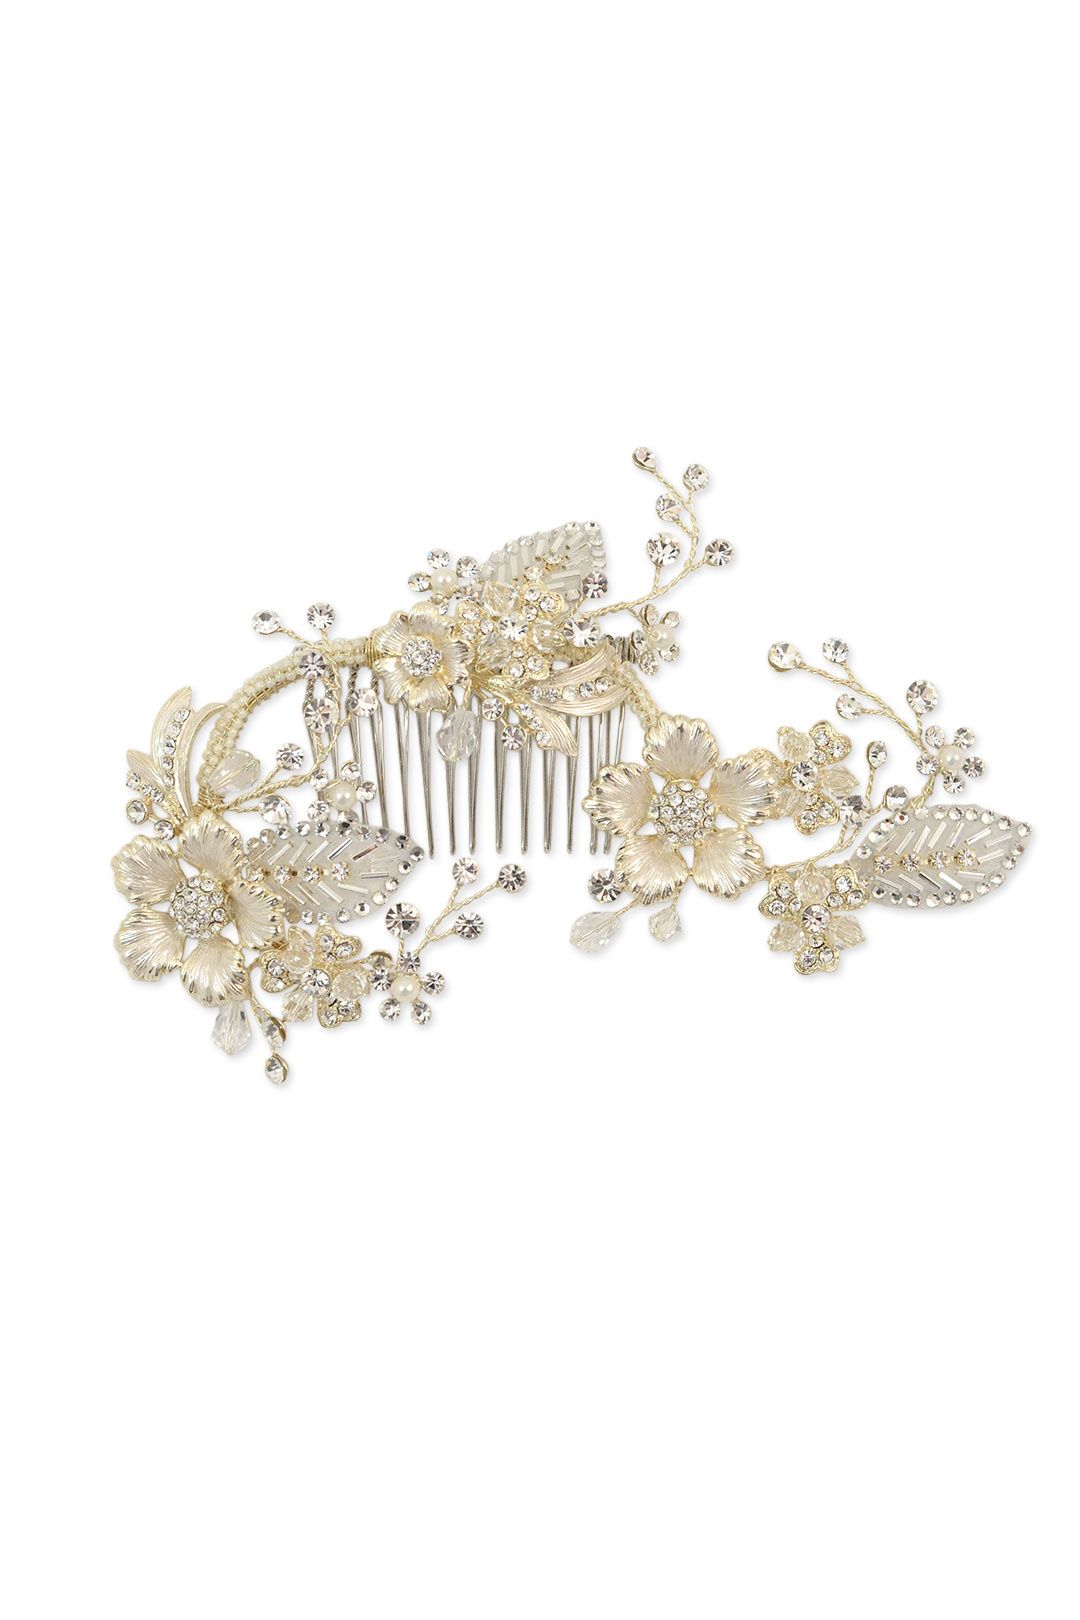 Rent Budding Romance Comb By Rtr Bridal Accessories For 25 Only